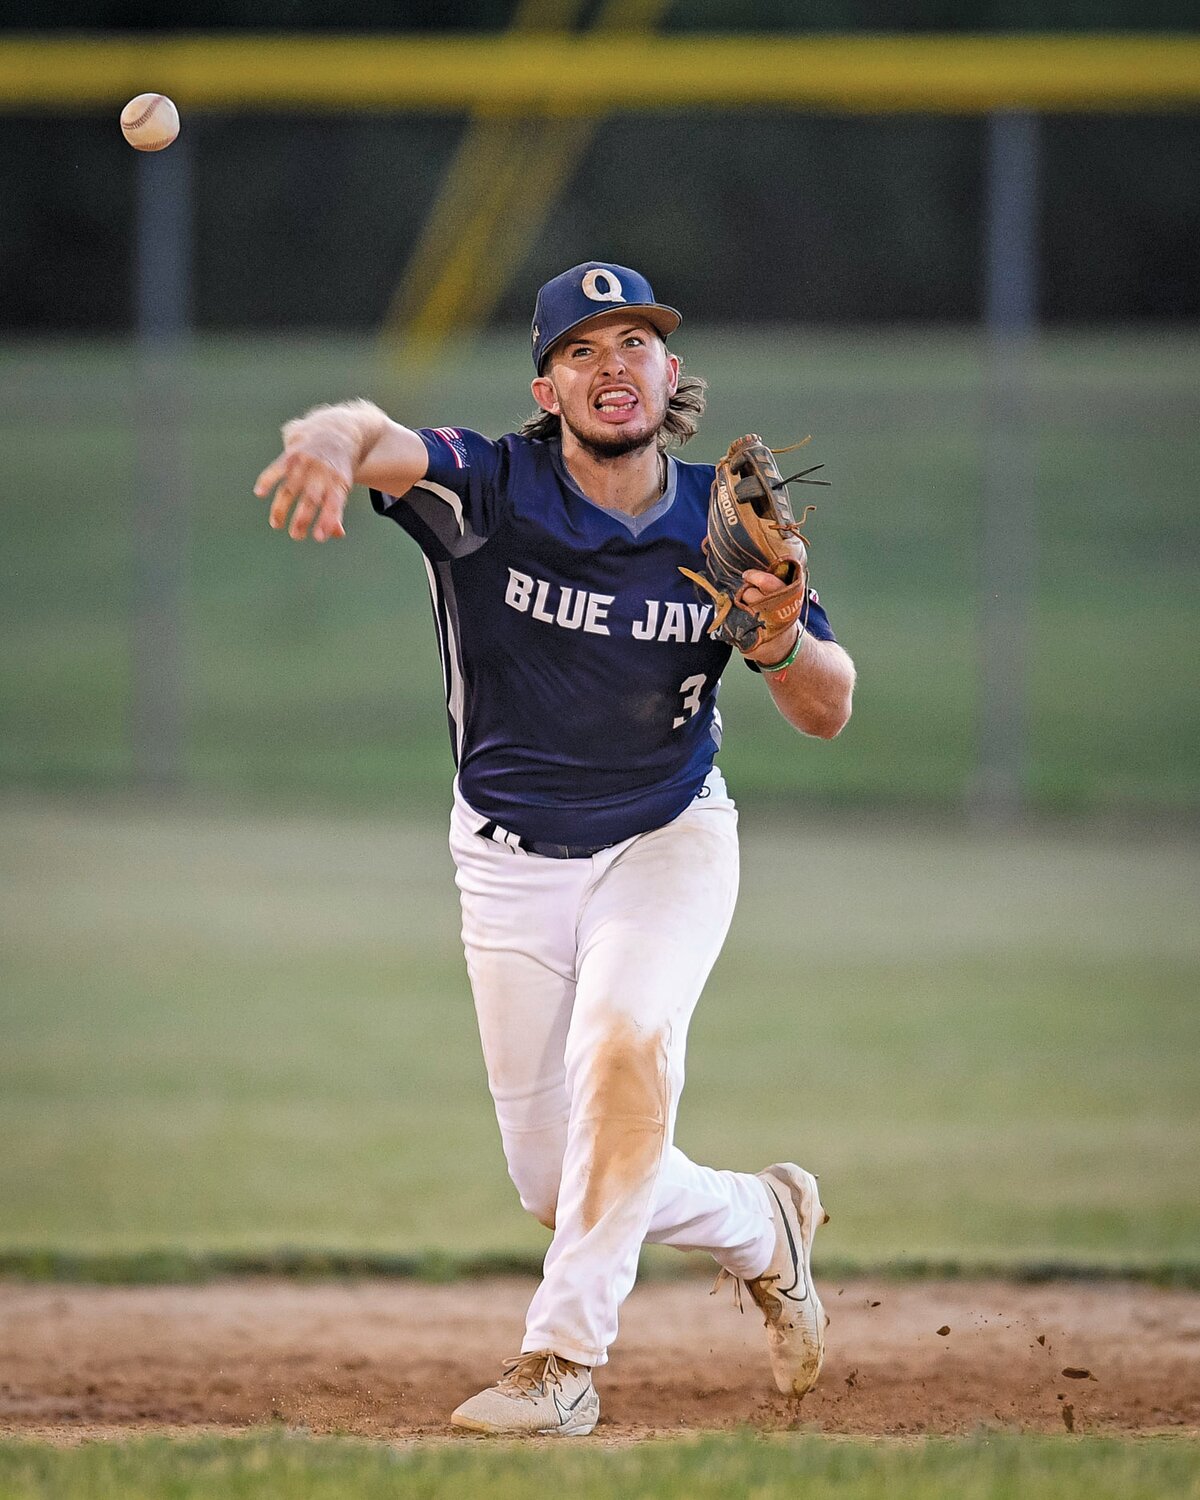 Quakertown shortstop Ty Everett fires across the field for an out during the bottom of the second.